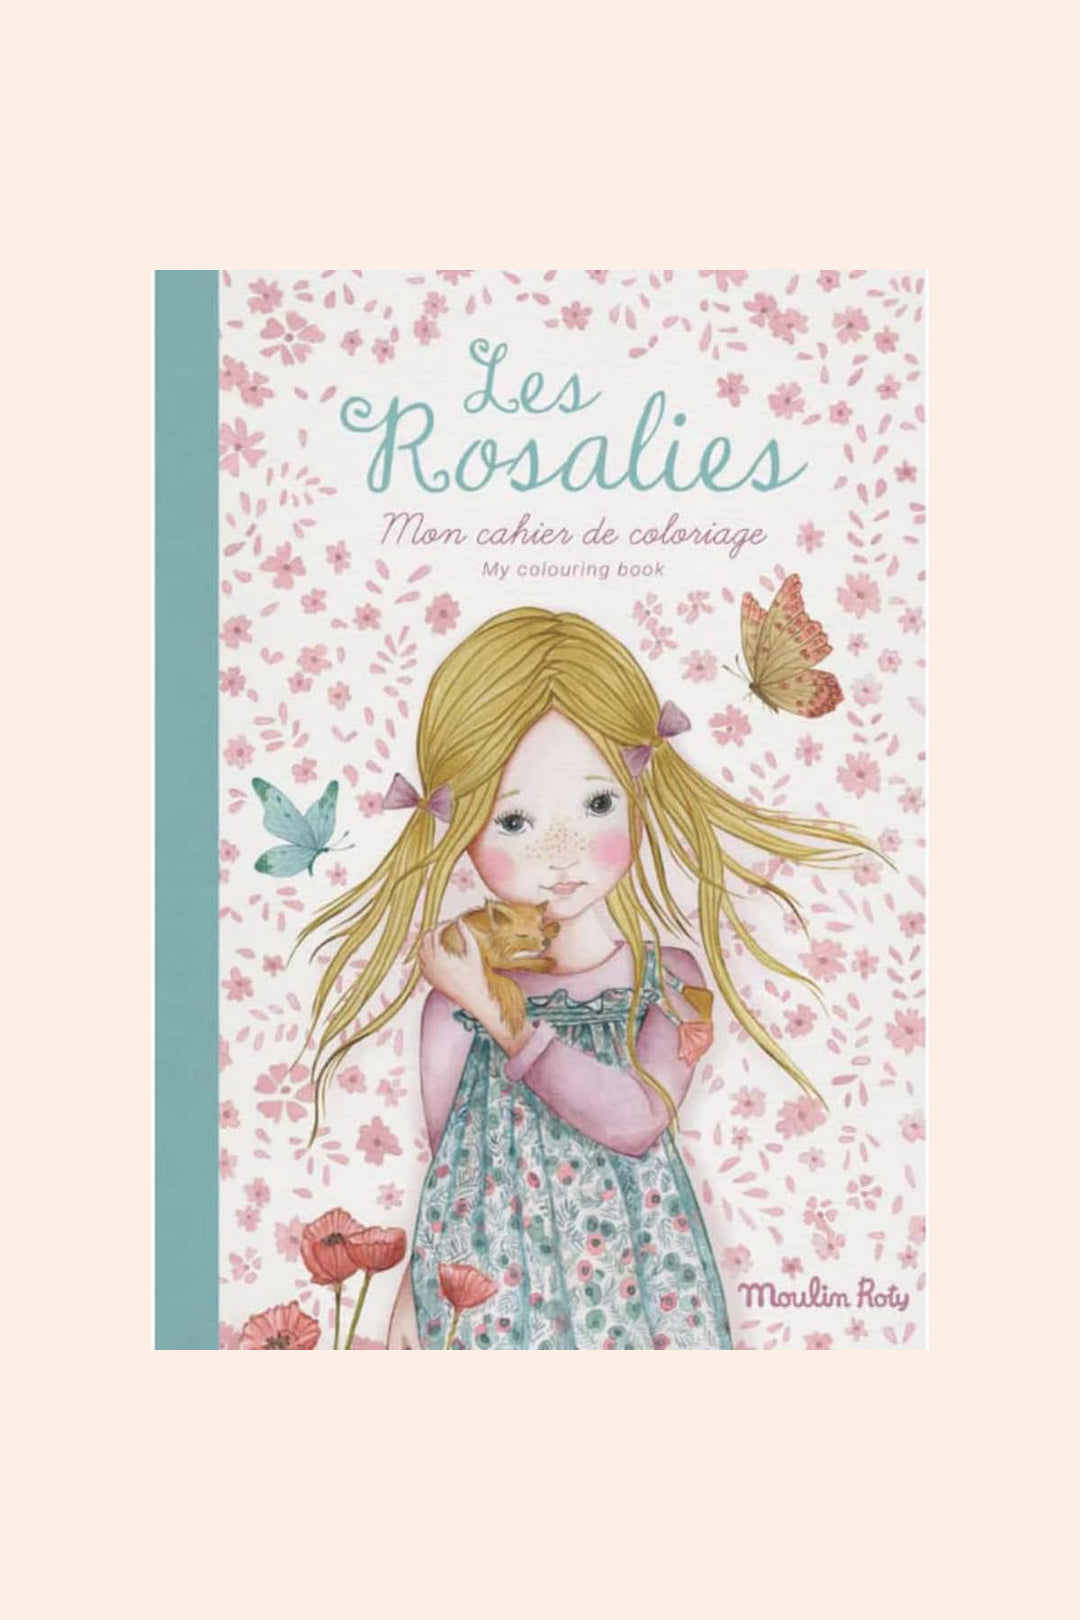 My Colouring book Les Rosalies - Moulin Roty